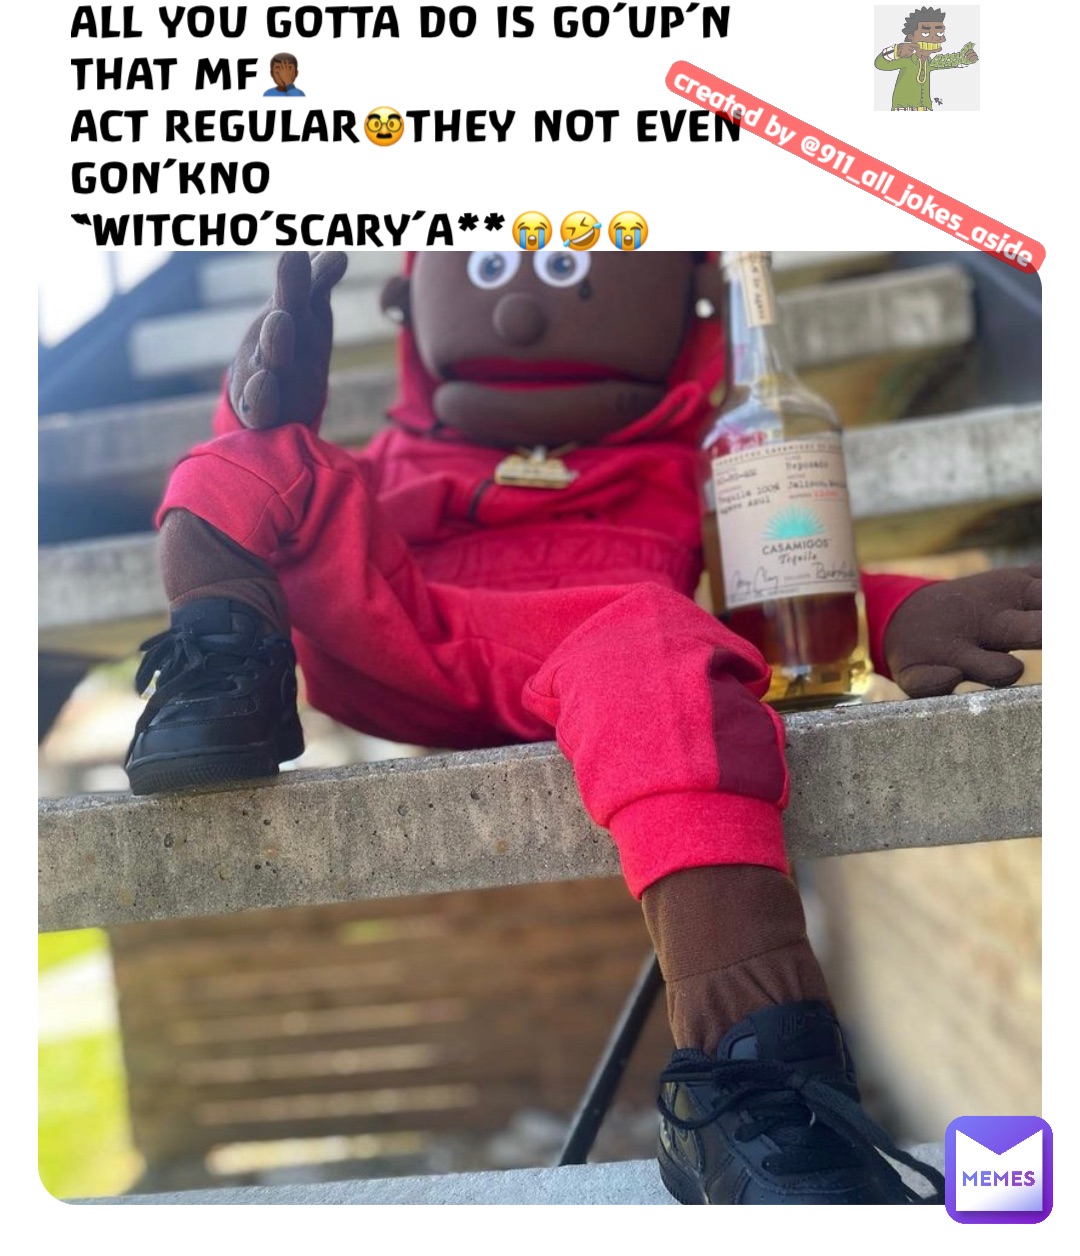 ALL YOU GOTTA DO IS GO’UP’N THAT MF🤦🏾‍♂️
ACT REGULAR🥸THEY NOT EVEN GON’KNO 
“WITCHO’SCARY’A**😭🤣😭